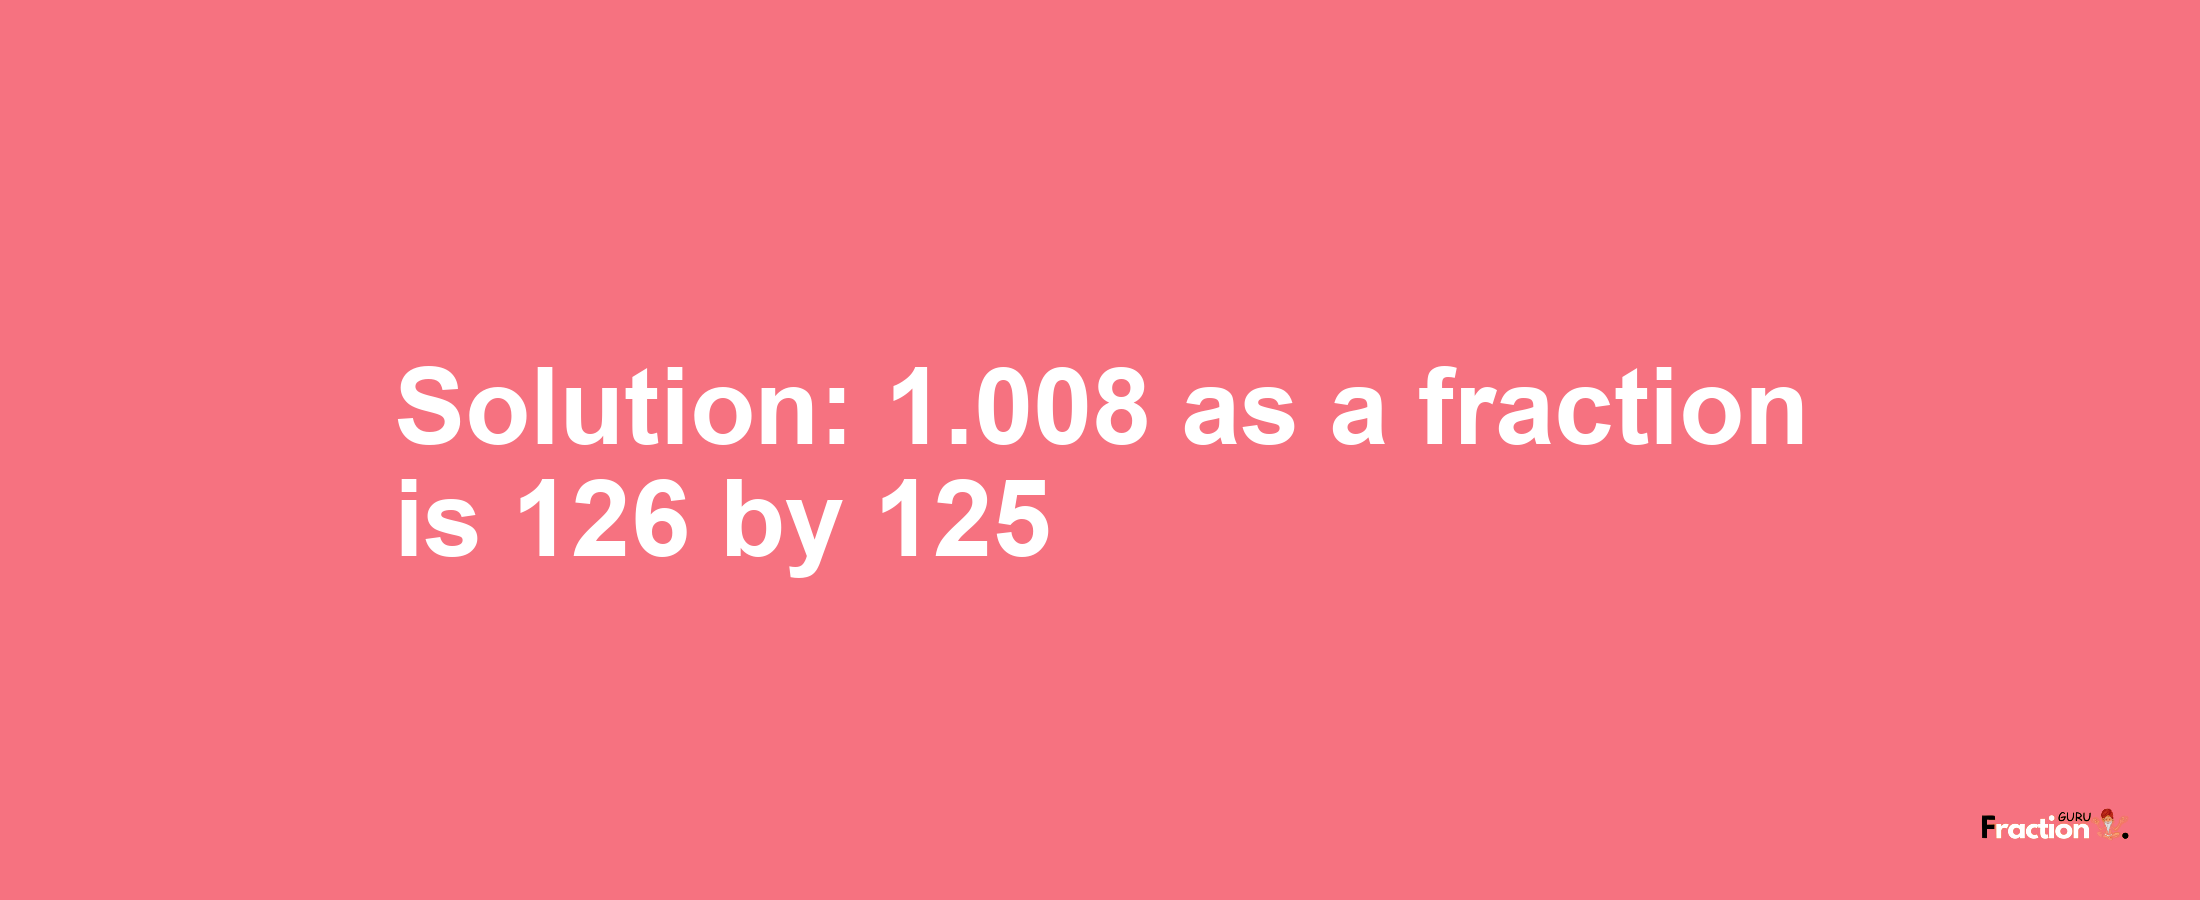 Solution:1.008 as a fraction is 126/125